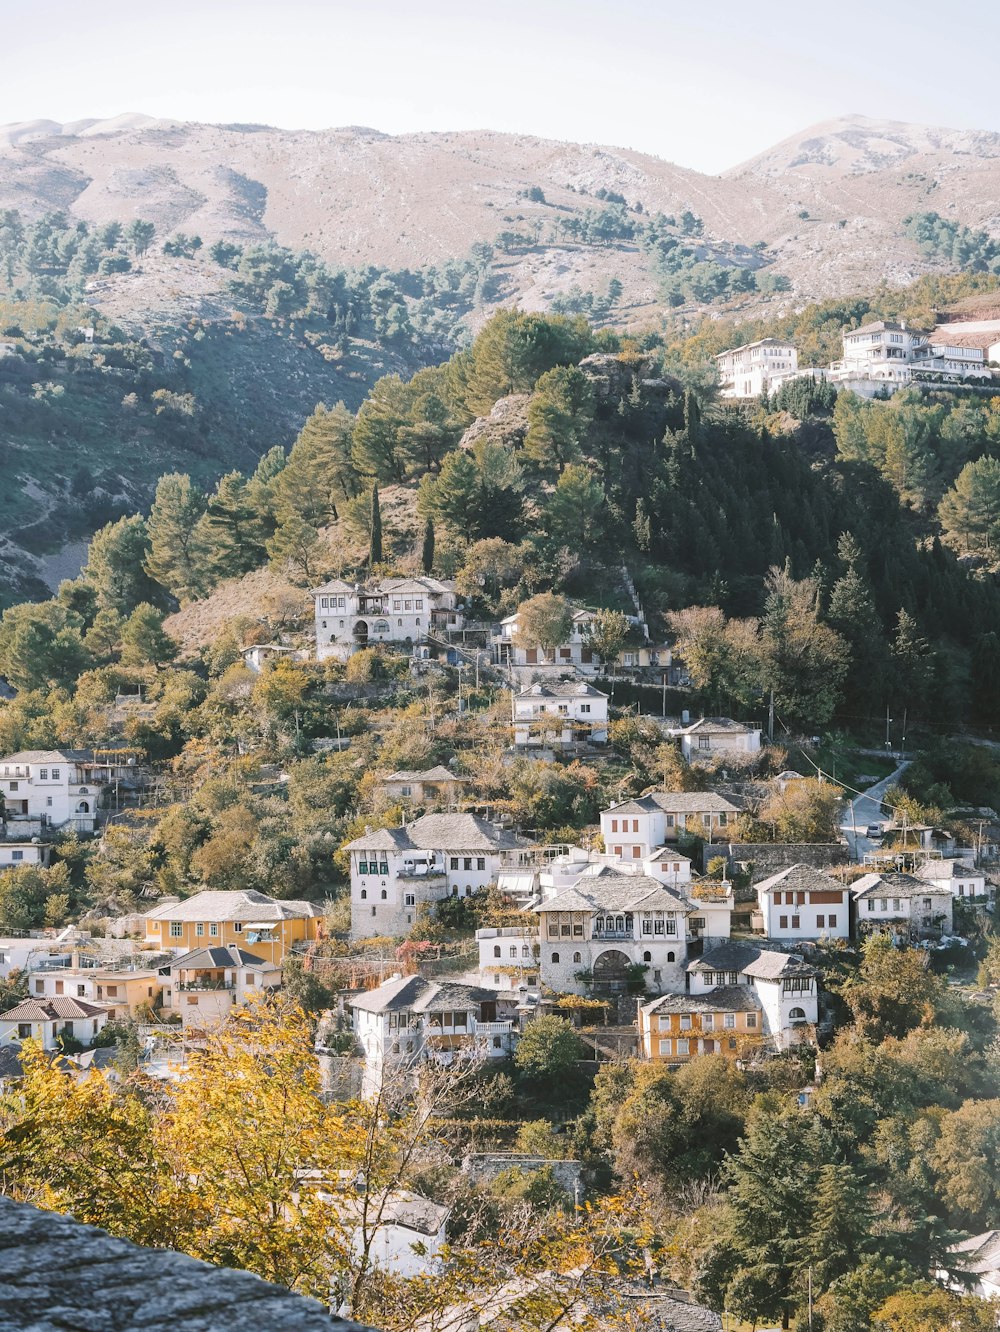 a view of a town on a hillside